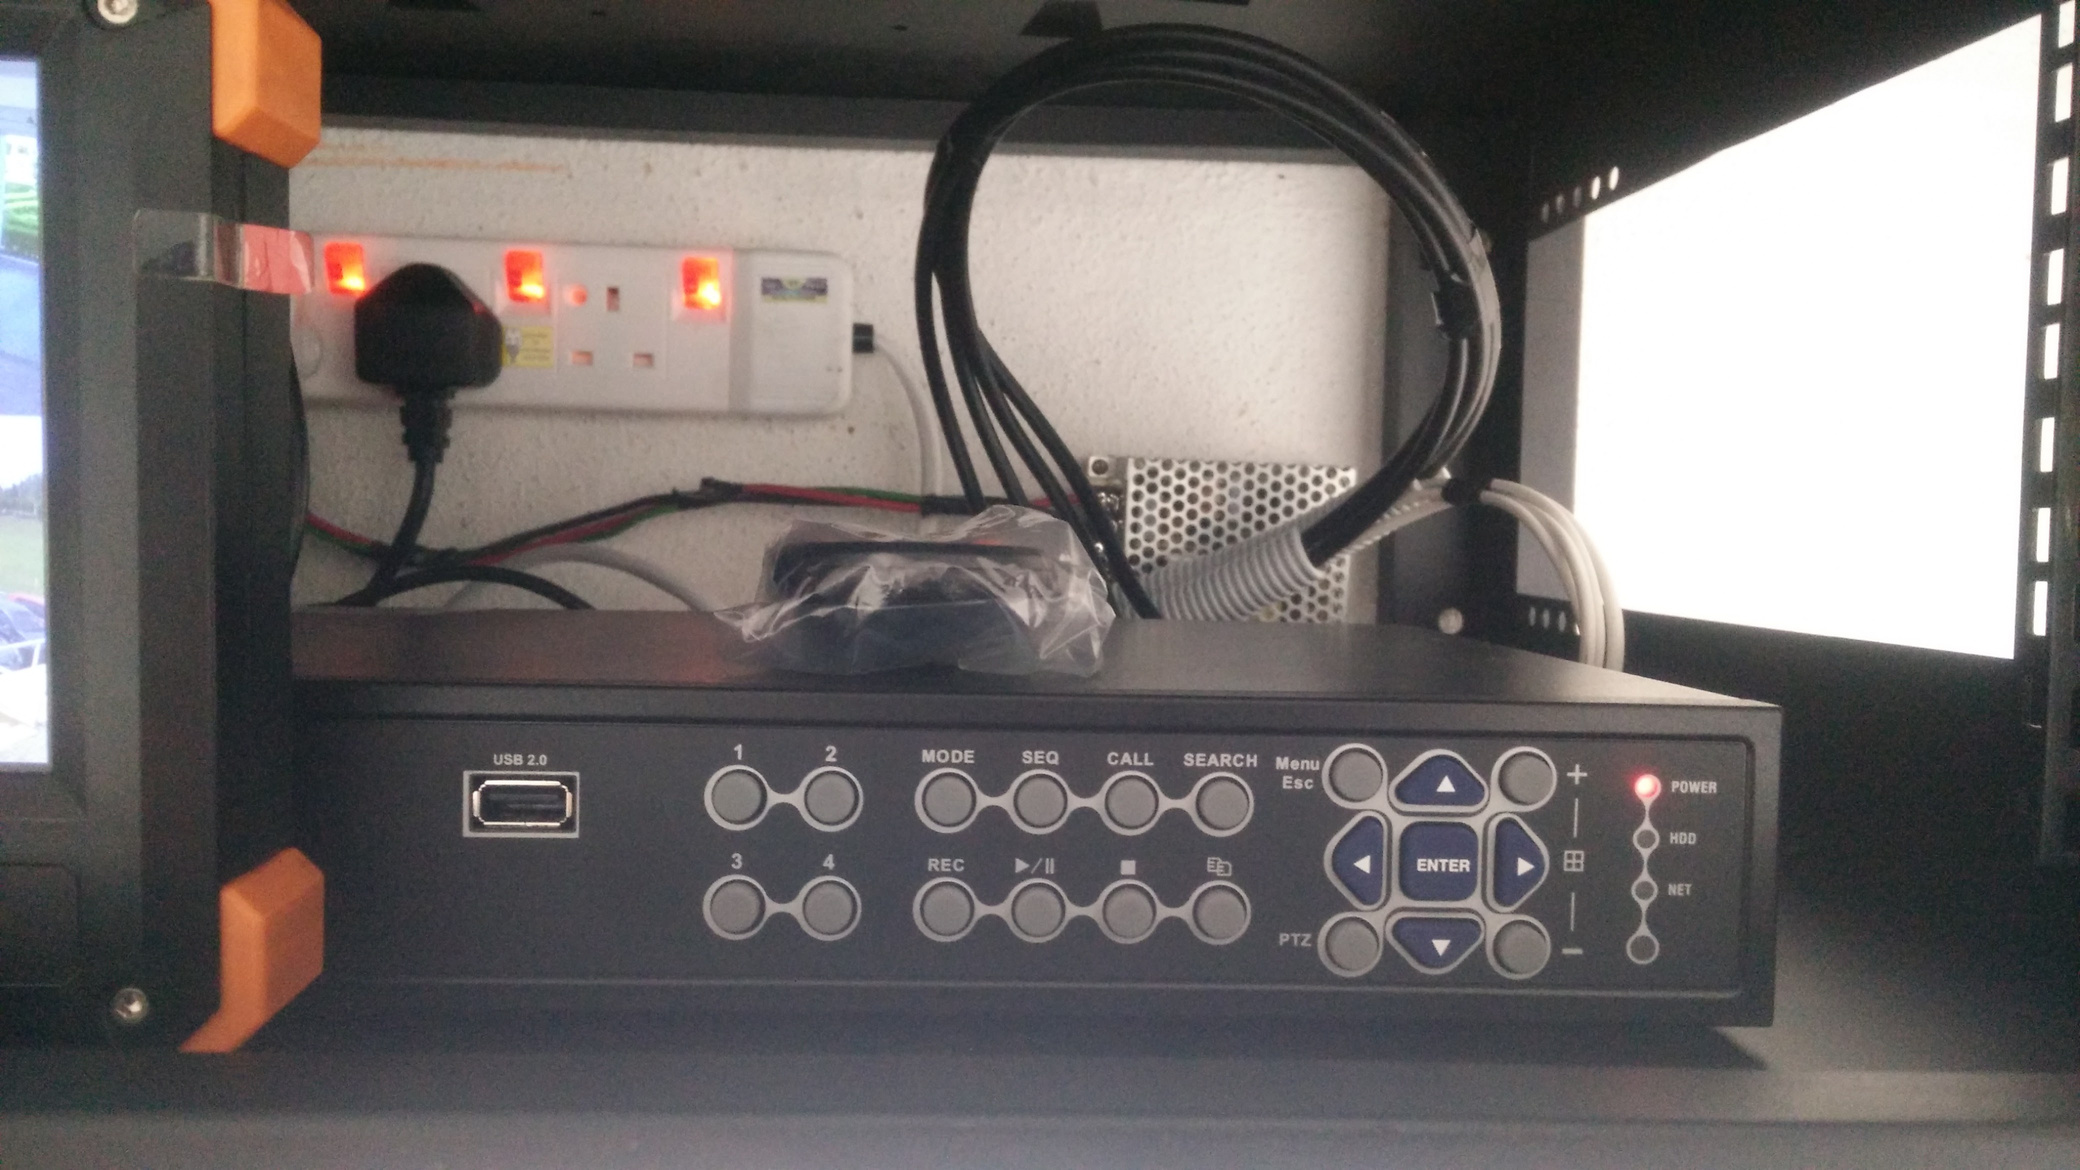 analog hd dvr connected to a monitor